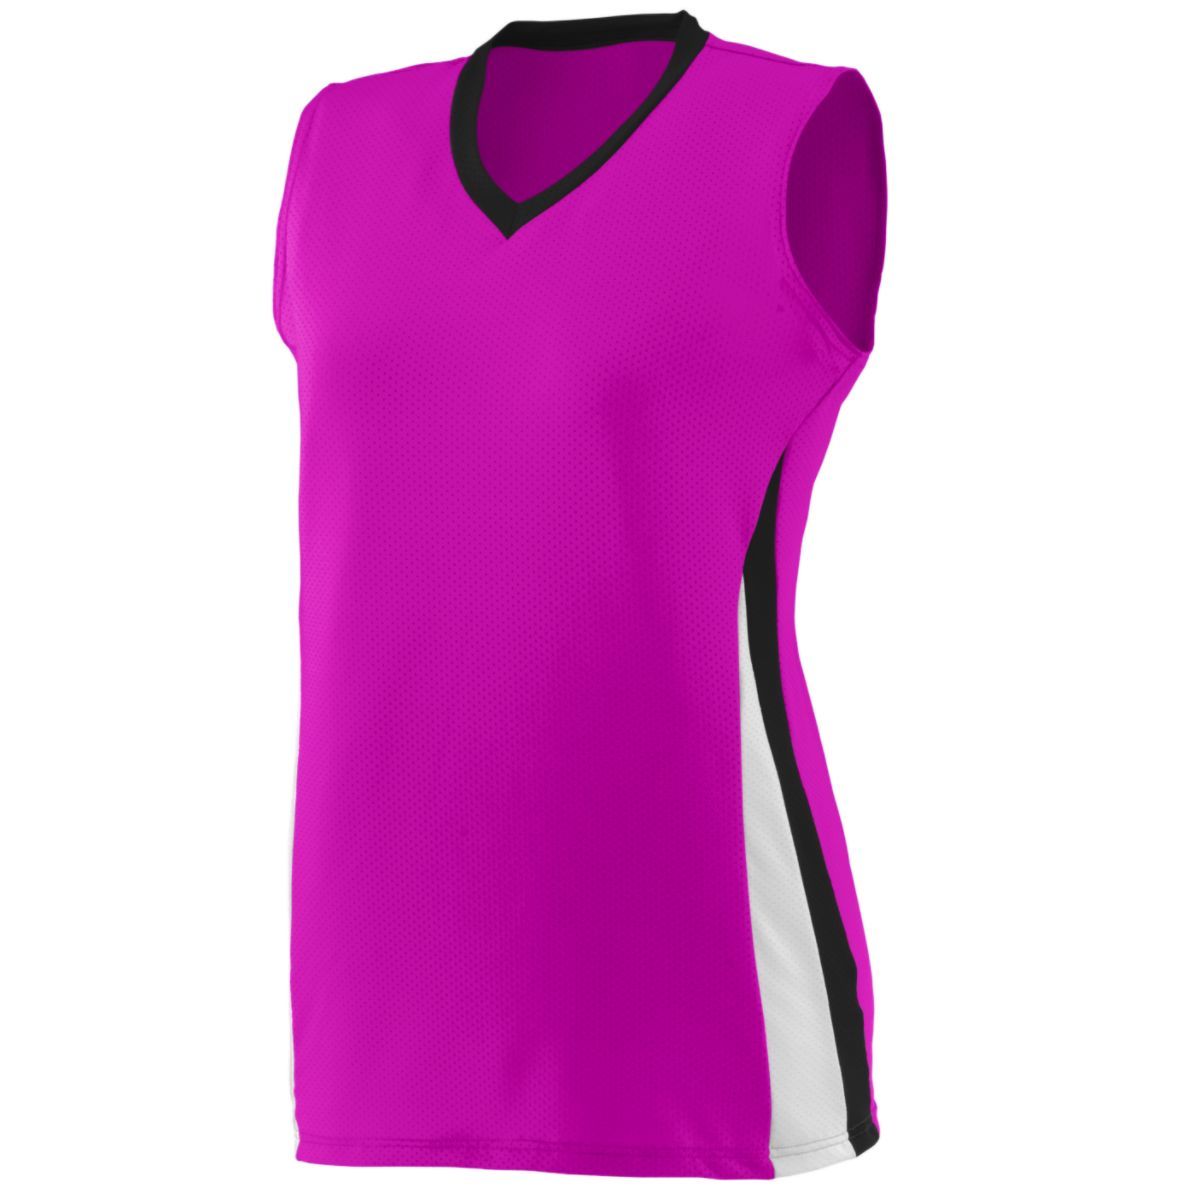 Augusta Sportswear Girls Tornado Jersey in Power Pink/Black/White  -Part of the Girls, Augusta-Products, Volleyball, Girls-Jersey, Shirts product lines at KanaleyCreations.com